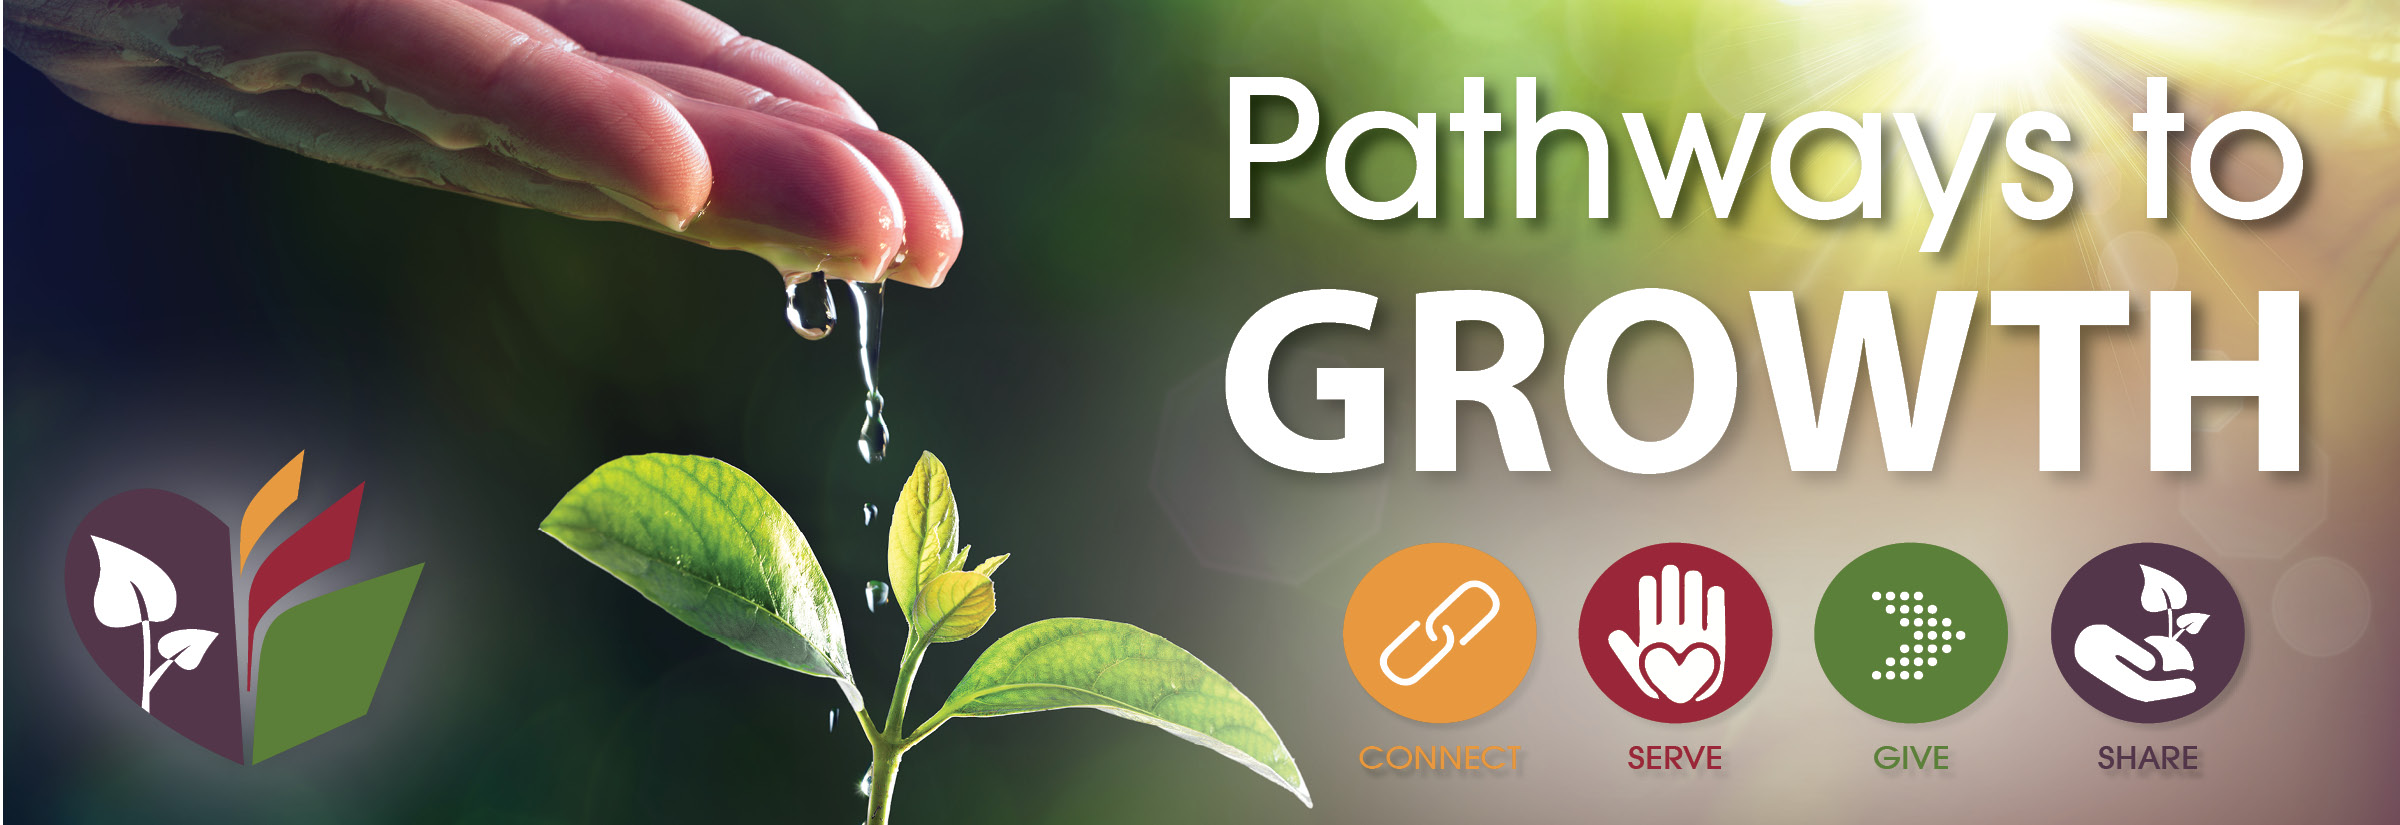 Pathways to growth